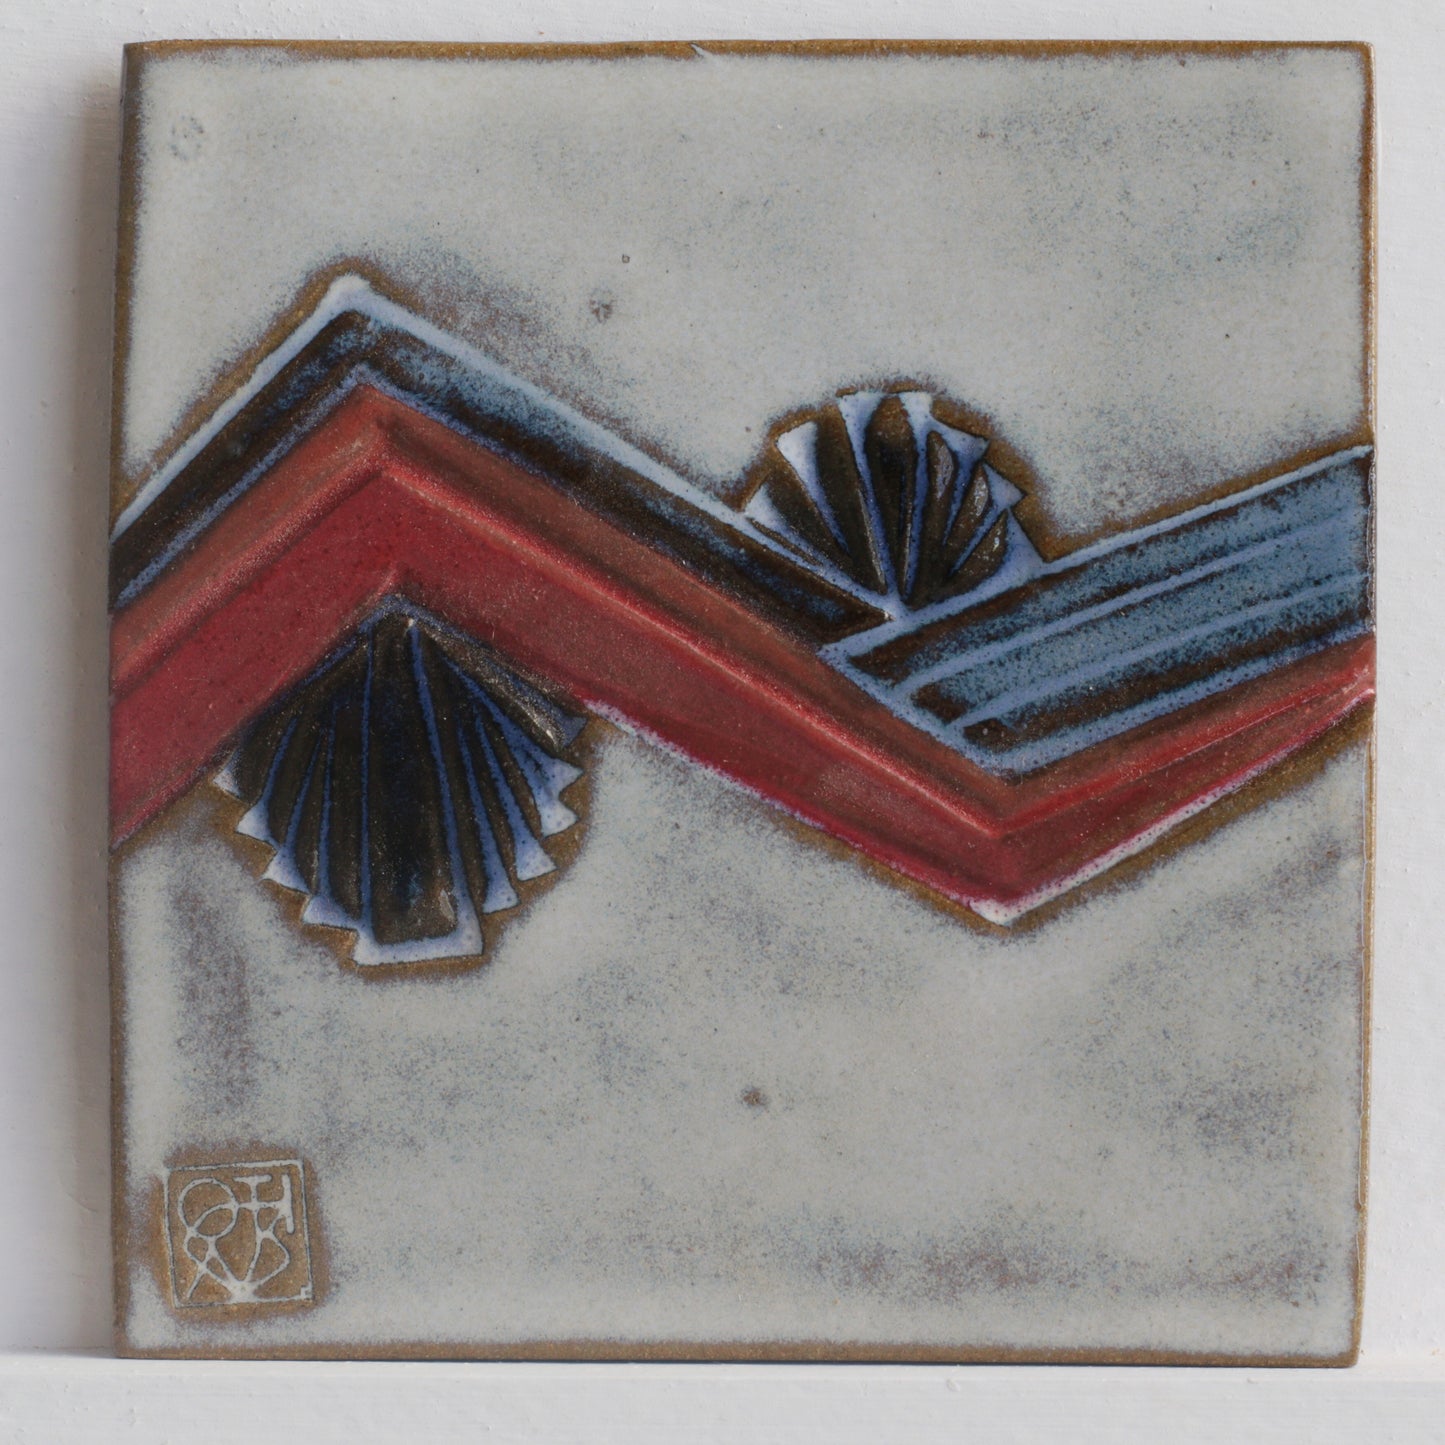 747- Coaster Set of (4) Small Square Tiles